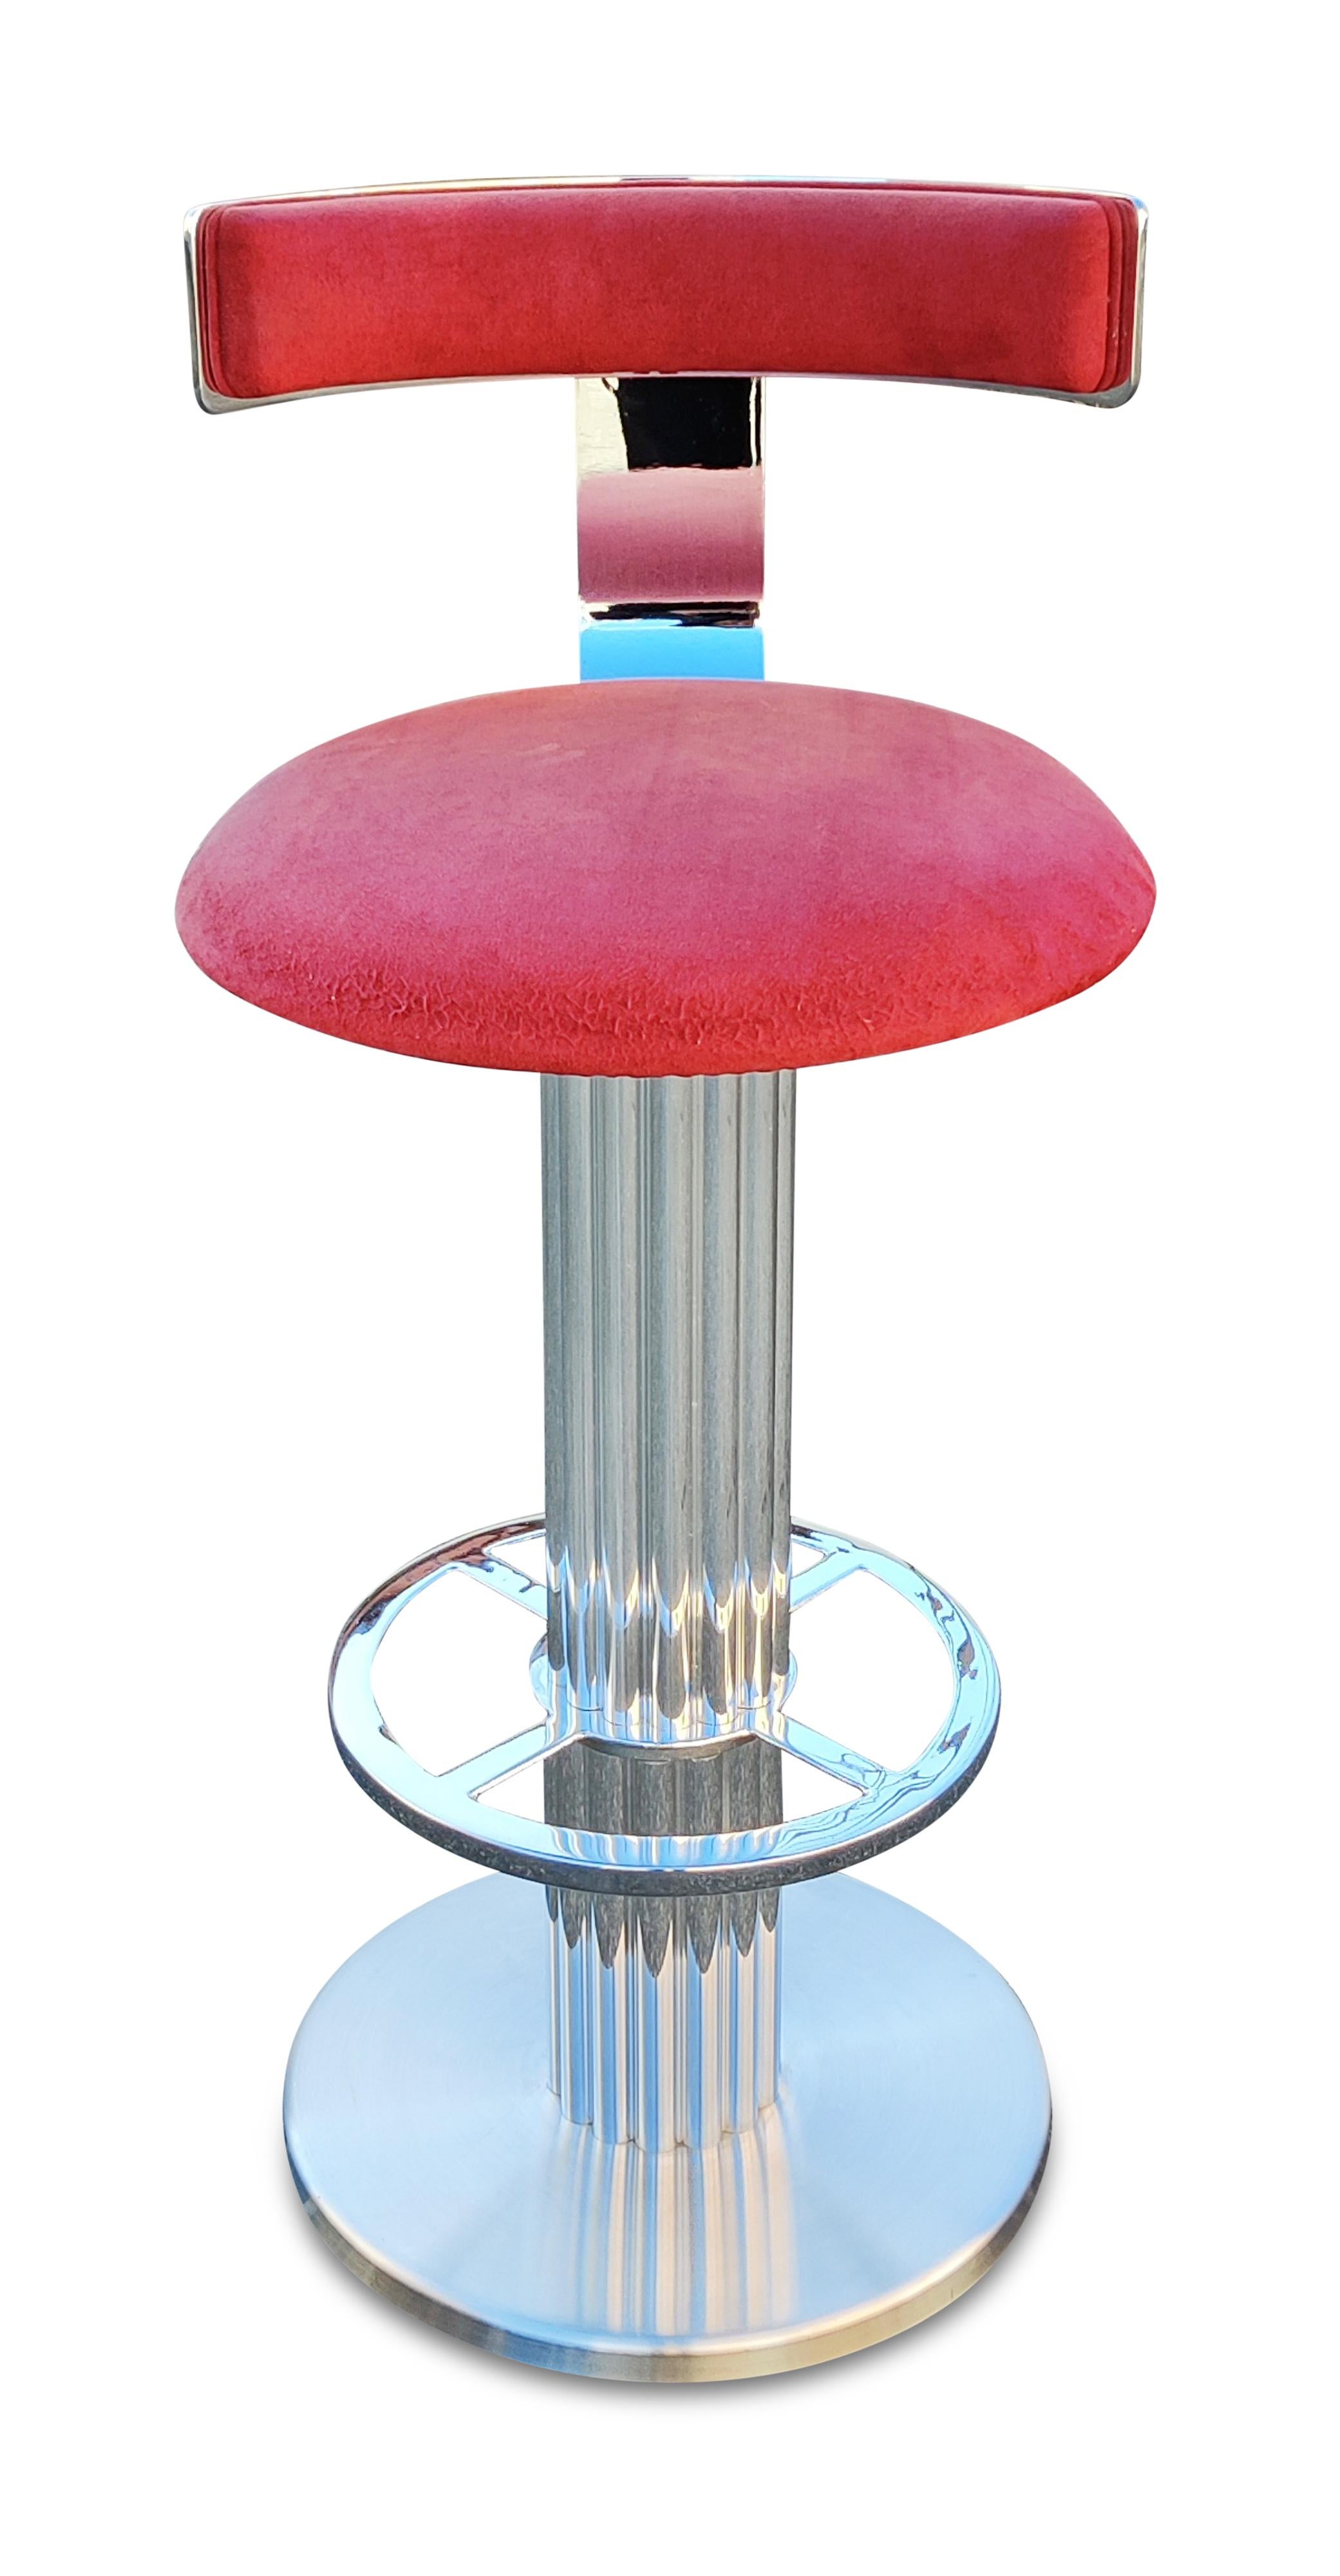 Three Designs for Leisure swivel bar stools in bright and brushed metalwork, USA, 1980s. 3 nickel-plated steel and aluminum by Designs for Leisure of Mt. Kisko New York. The now a defunct company, was a high quality seating resource for the interior